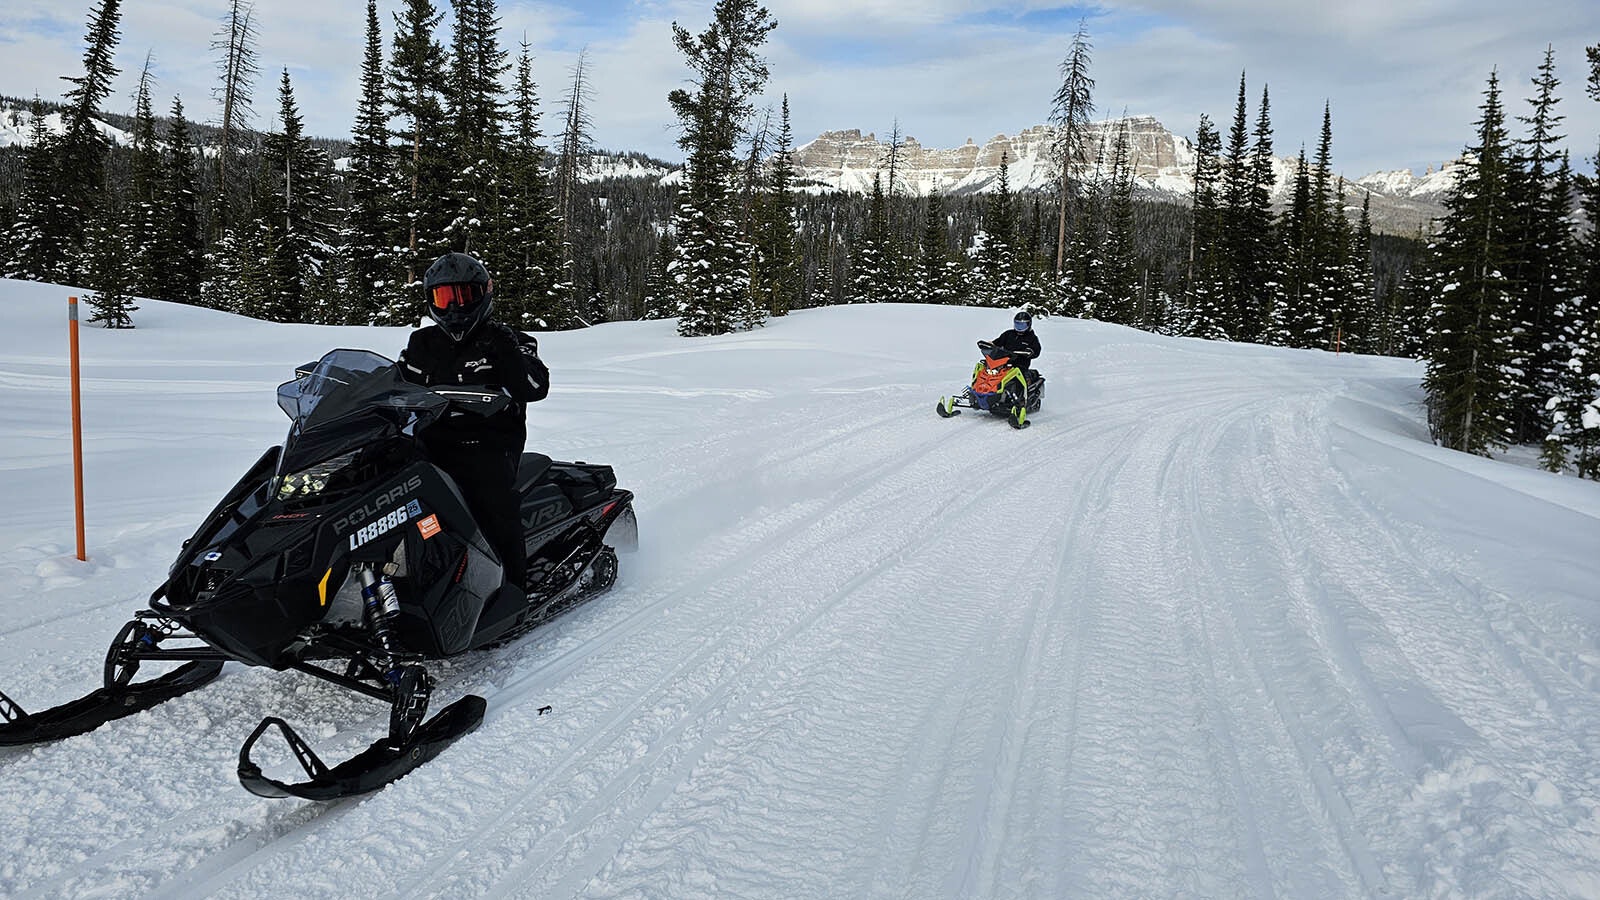 It's not uncommon to see other snowmobilers out on the groomed trails, but there are 700 miles of trails so its also easy to spread out and get away from everyone.